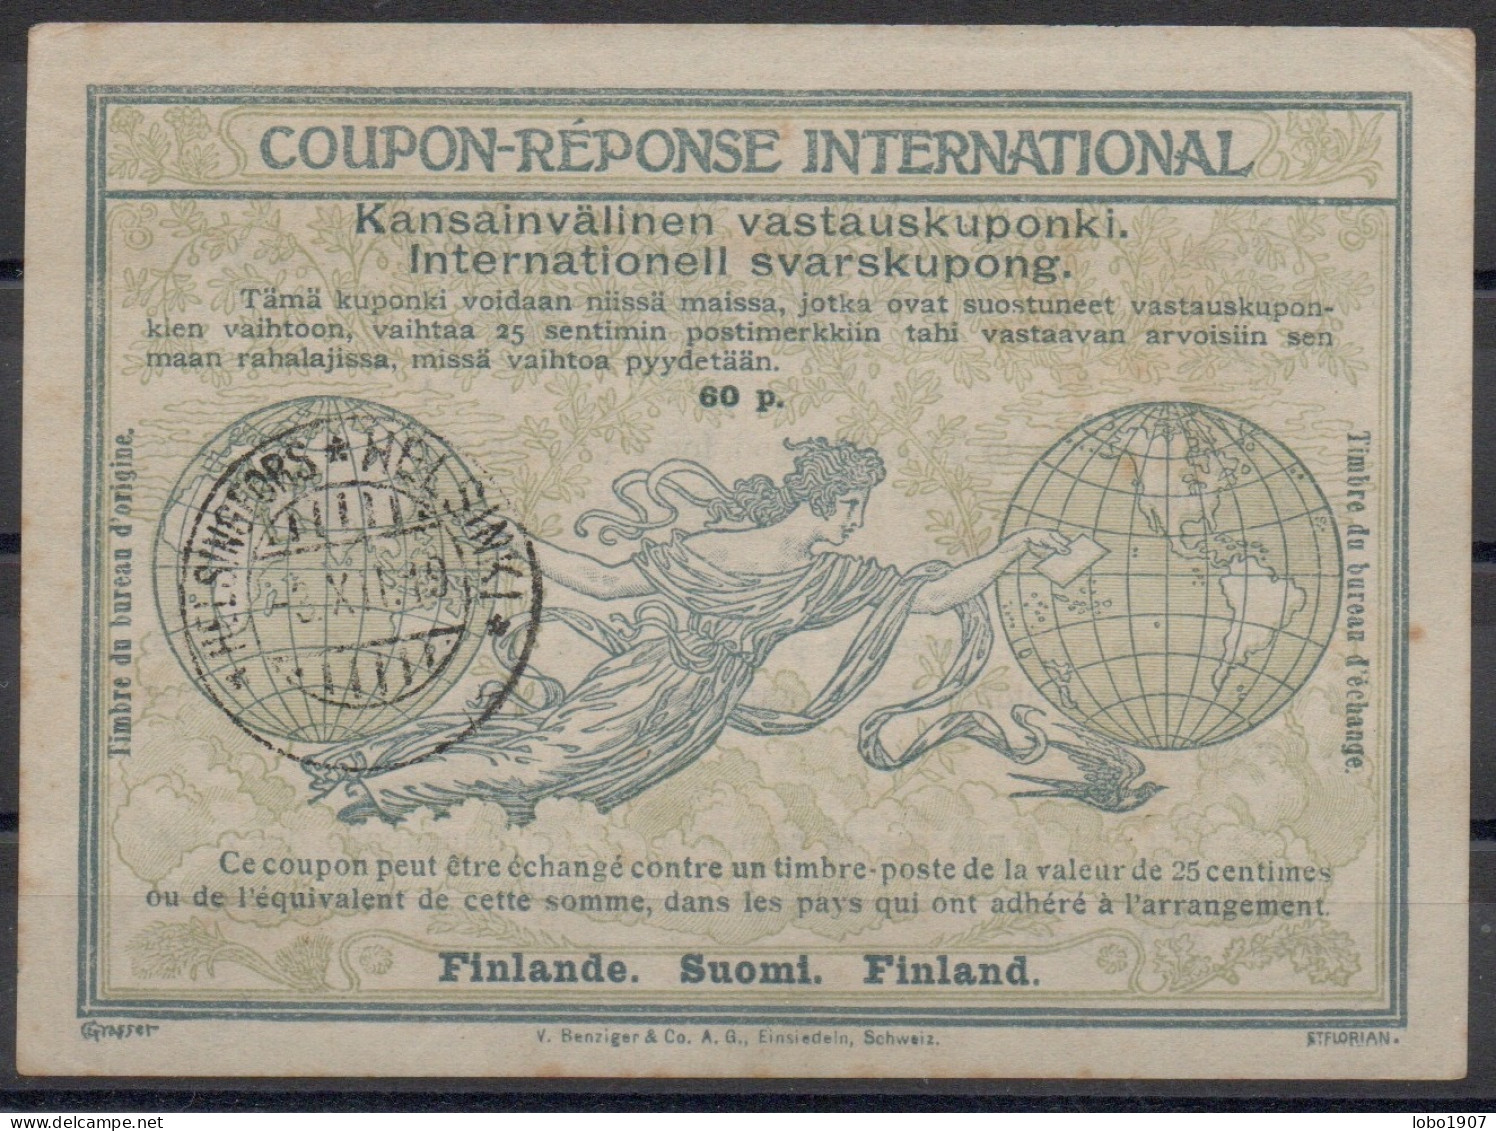 FINLAND FINLANDE 1919  Ro4  60p  First International Reply Coupon Reponse Antwortschein IRC IAS  HELSINGFORS 03.12.1919 - Postal Stationery